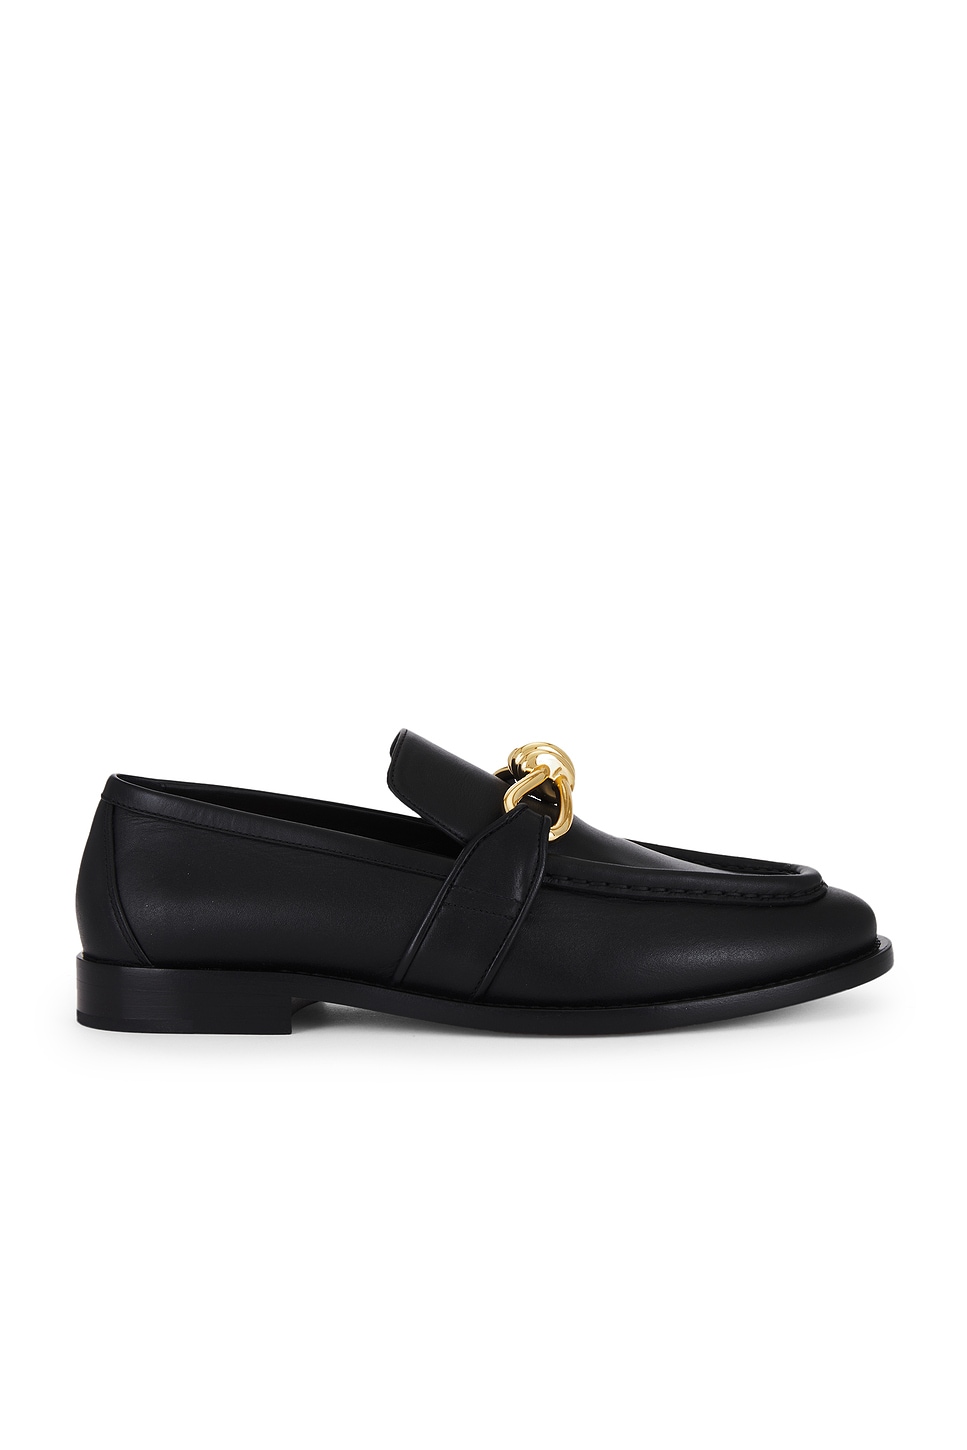 Astaire Loafer in Black